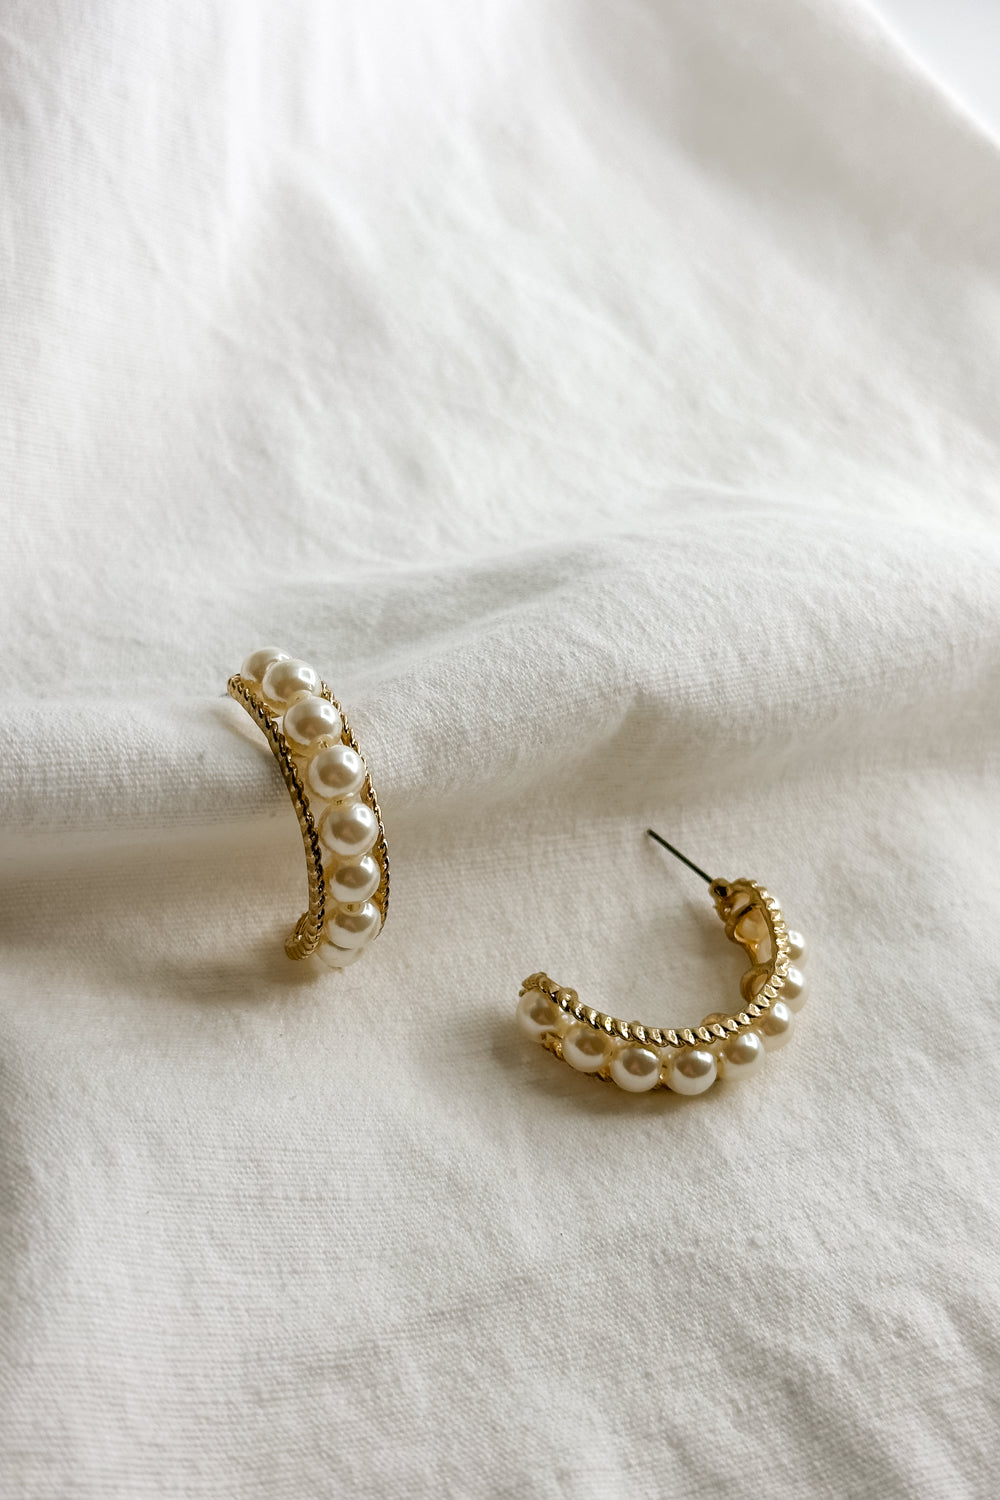 Flat lay view of the Elisa Gold Rope & Pearl Hoop Earring which features gold rope hoops with pearls